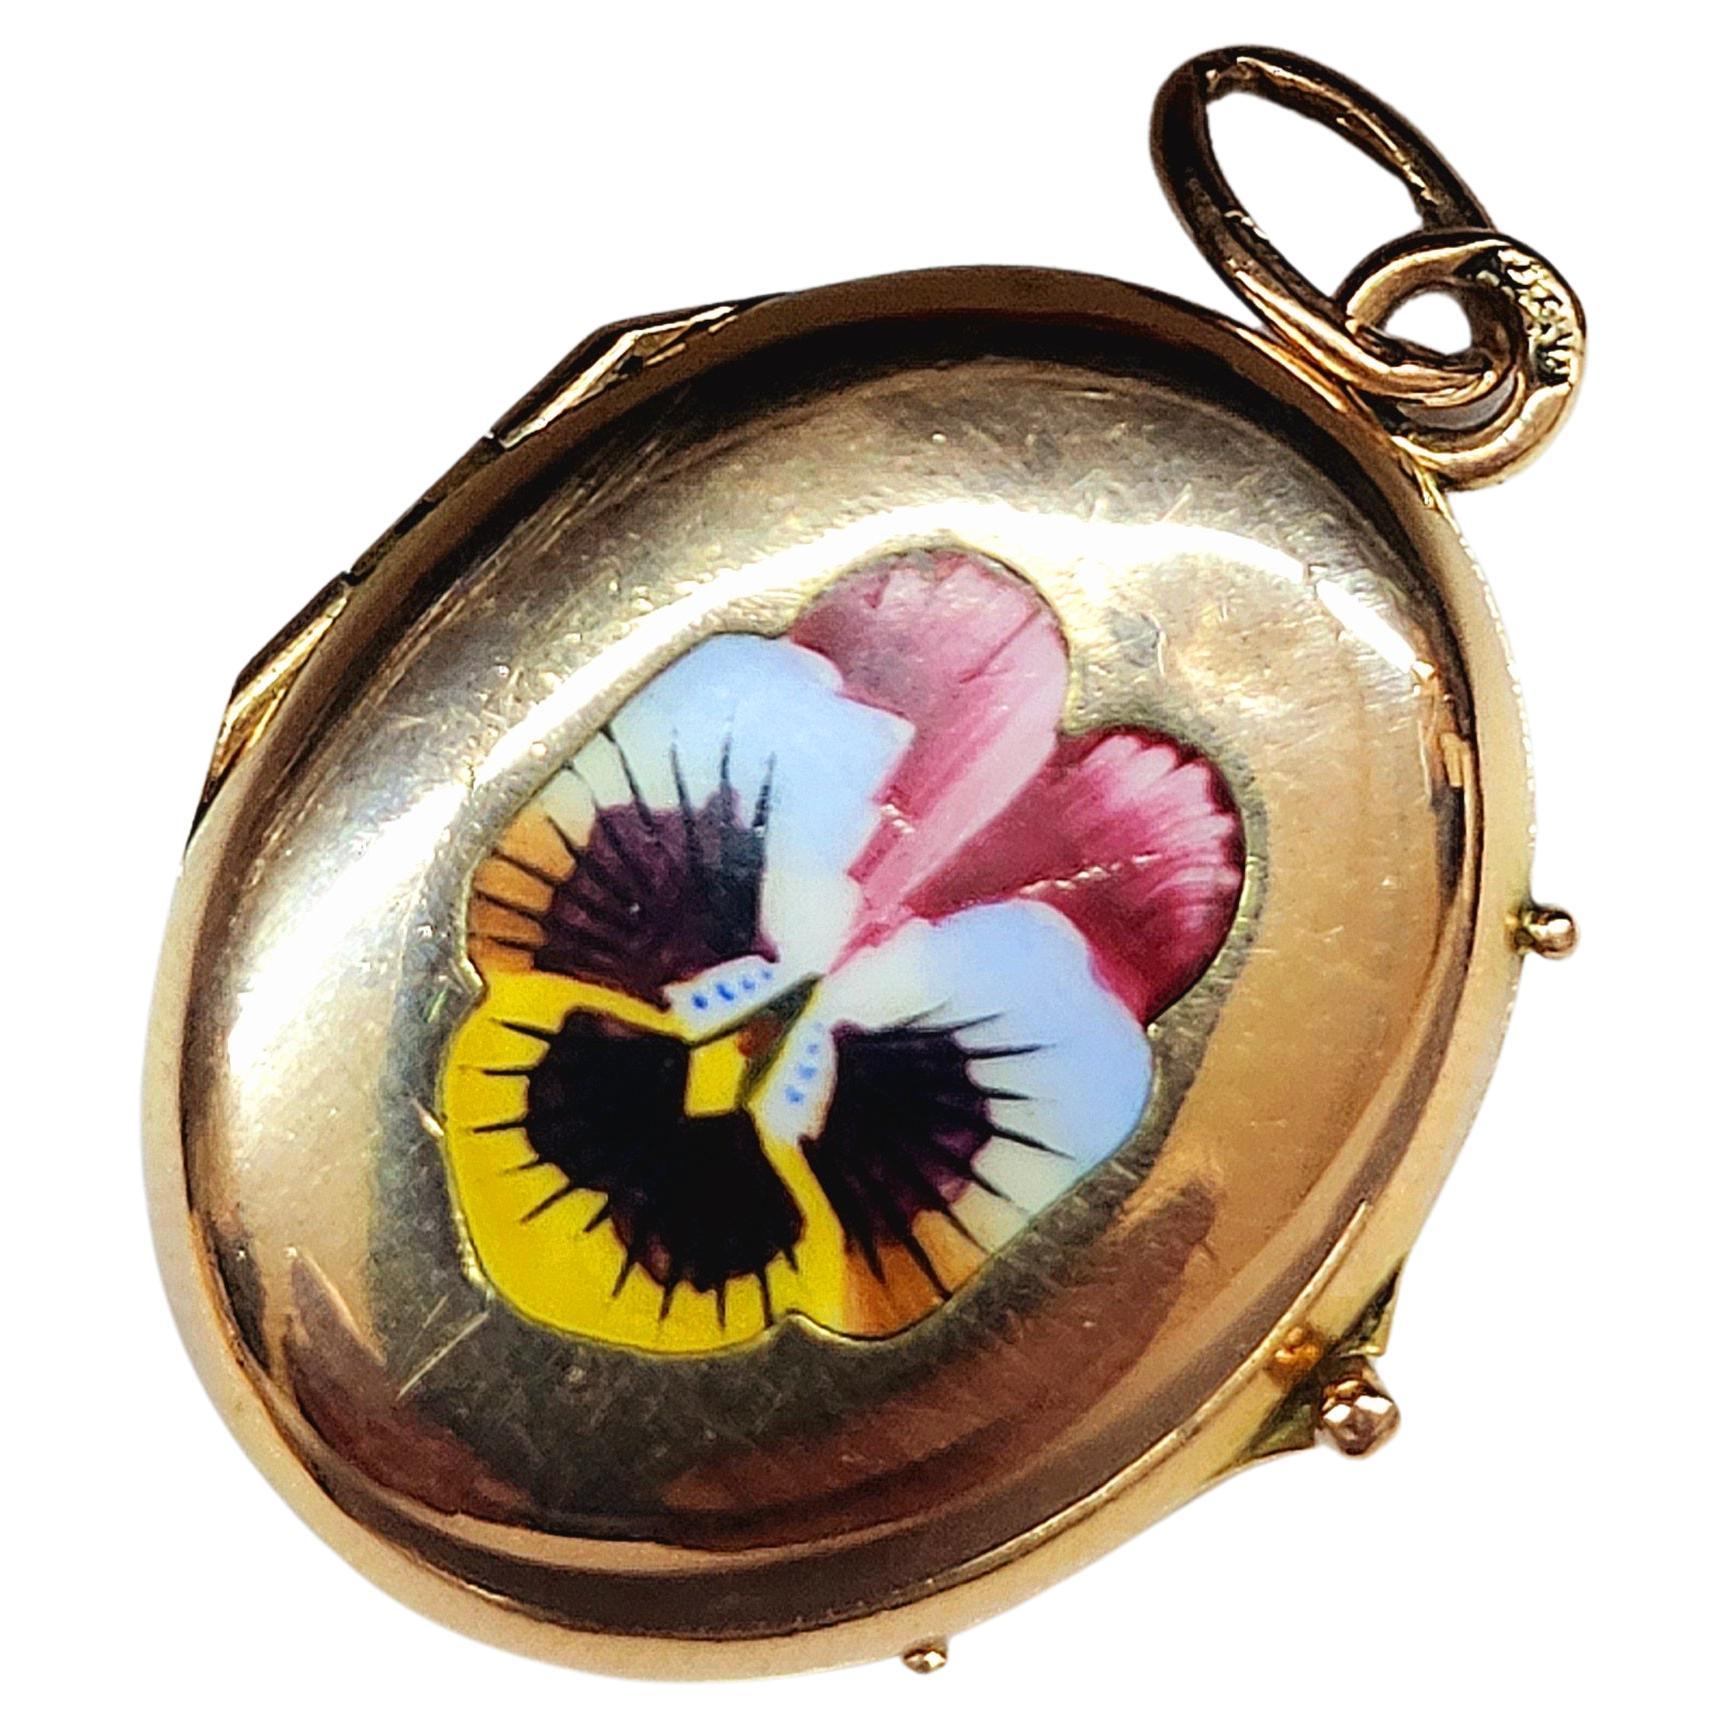 Antique 14k gold russian locket pendant with enamel hand painted on front of a flower pendant was made during the imperial russian era 1907/1917.c hall marked 56 imperial russian gold standard and assay mark with total pendant lenght 3.5cm 